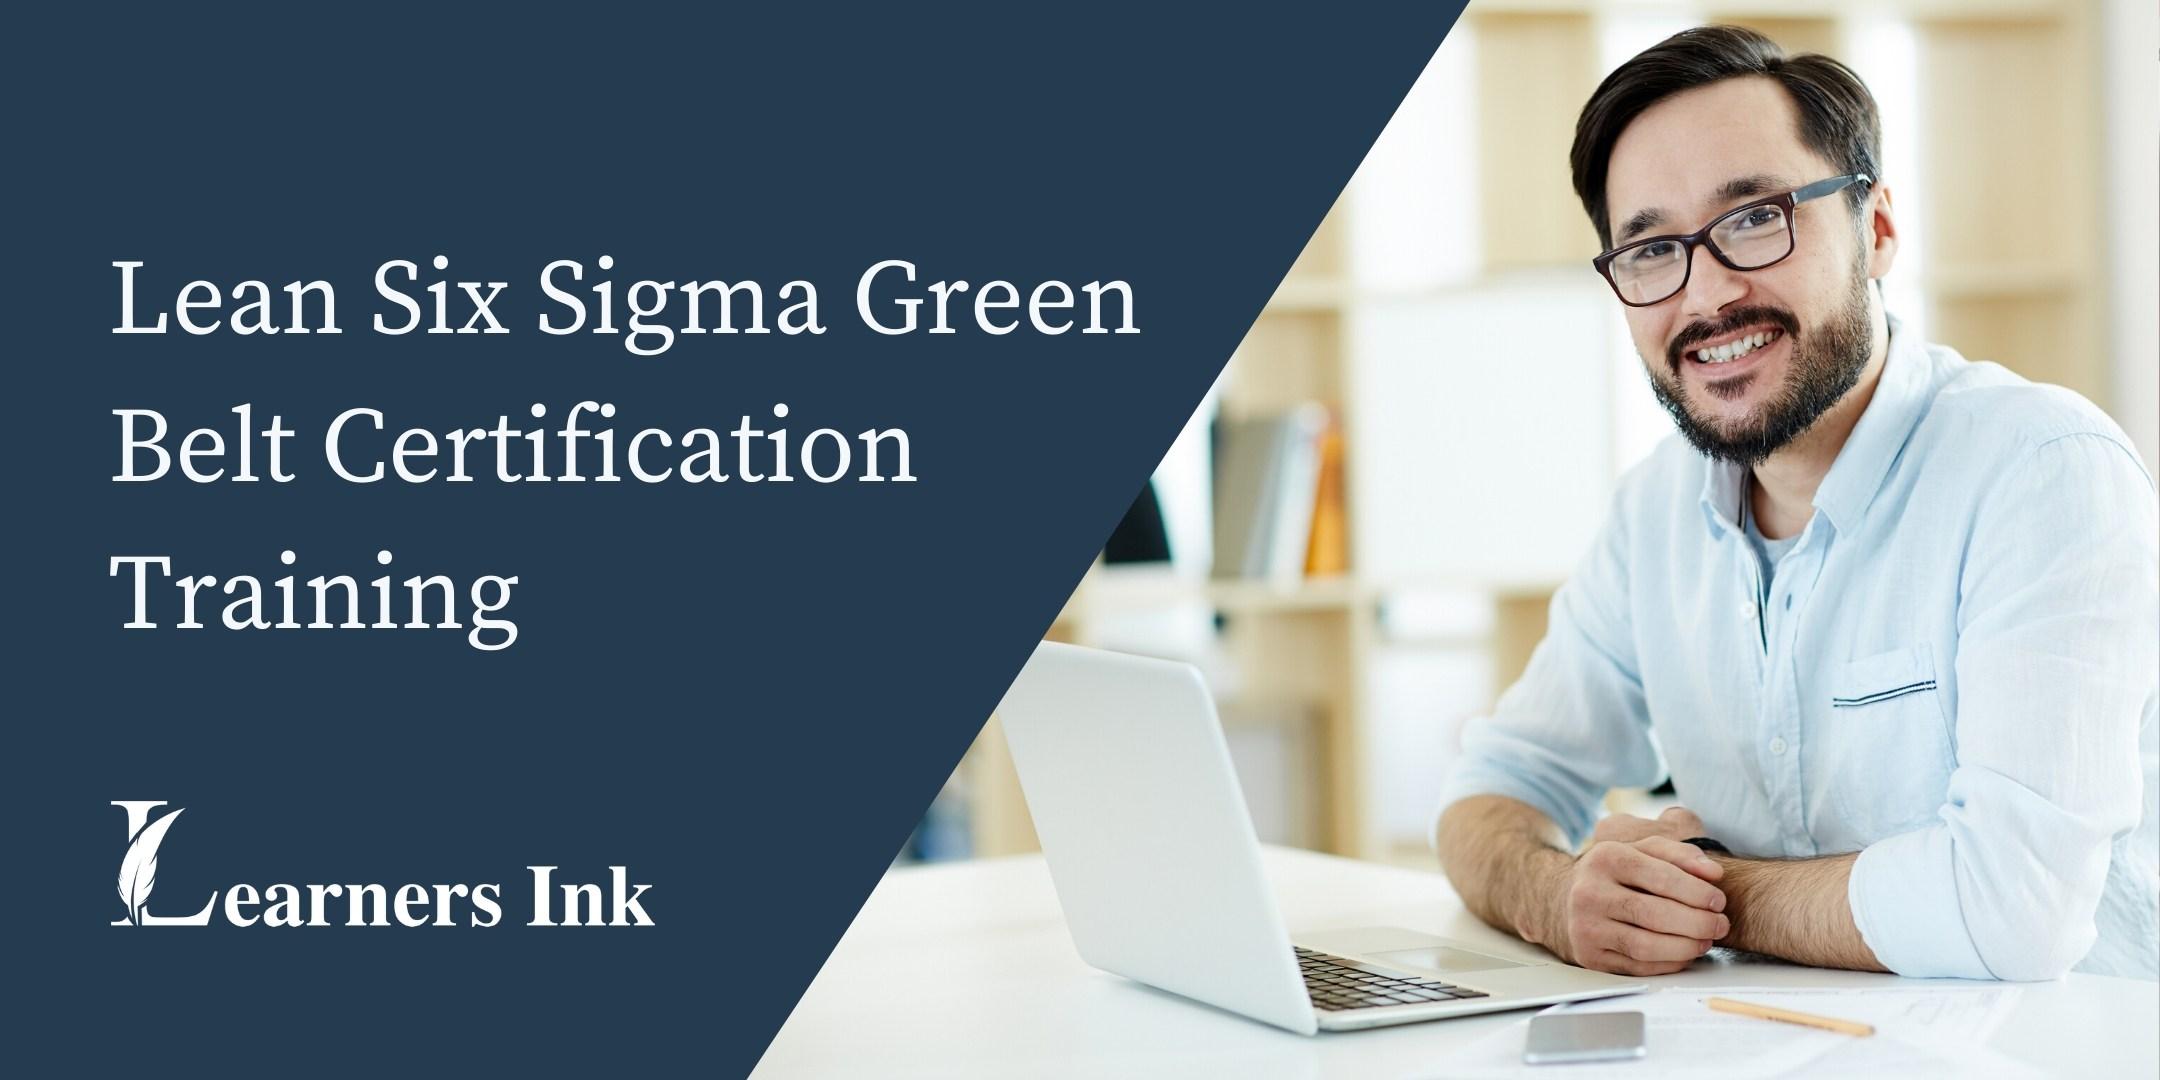 Lean Six Sigma Green Belt Certification Training Course (LSSGB) in Peoria